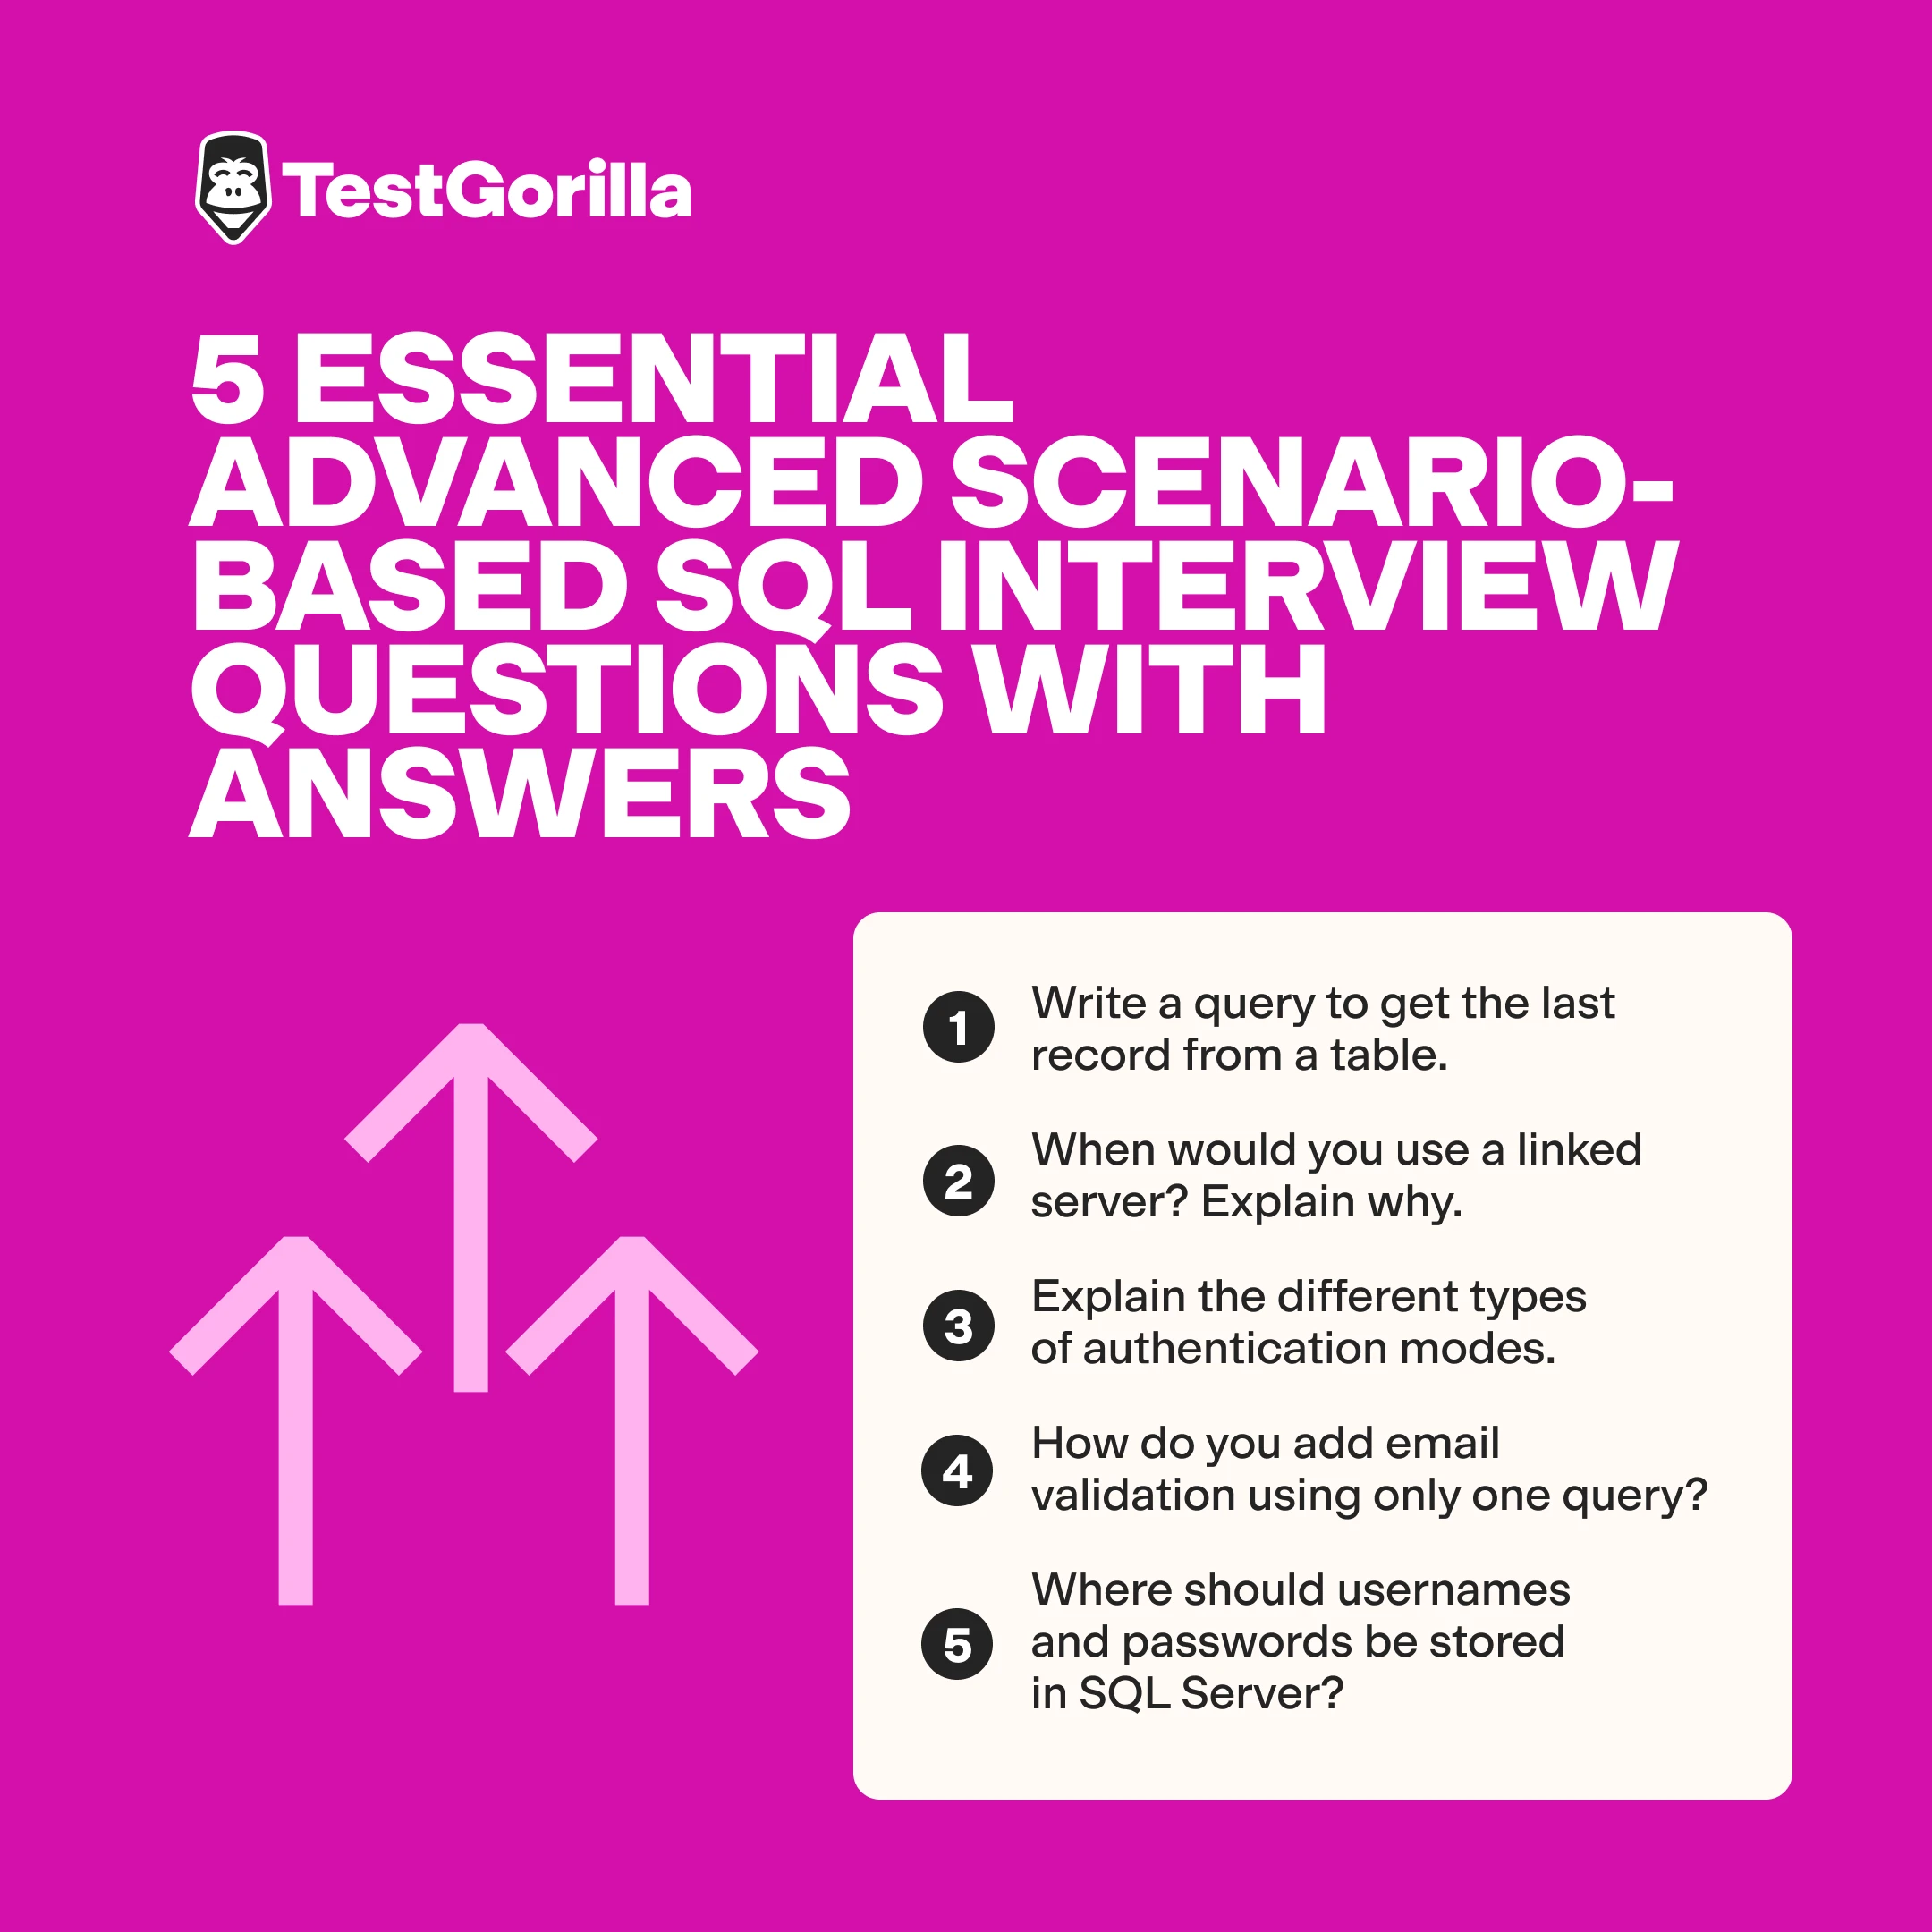 list of 5 advanced scenario-based SQL interview questions